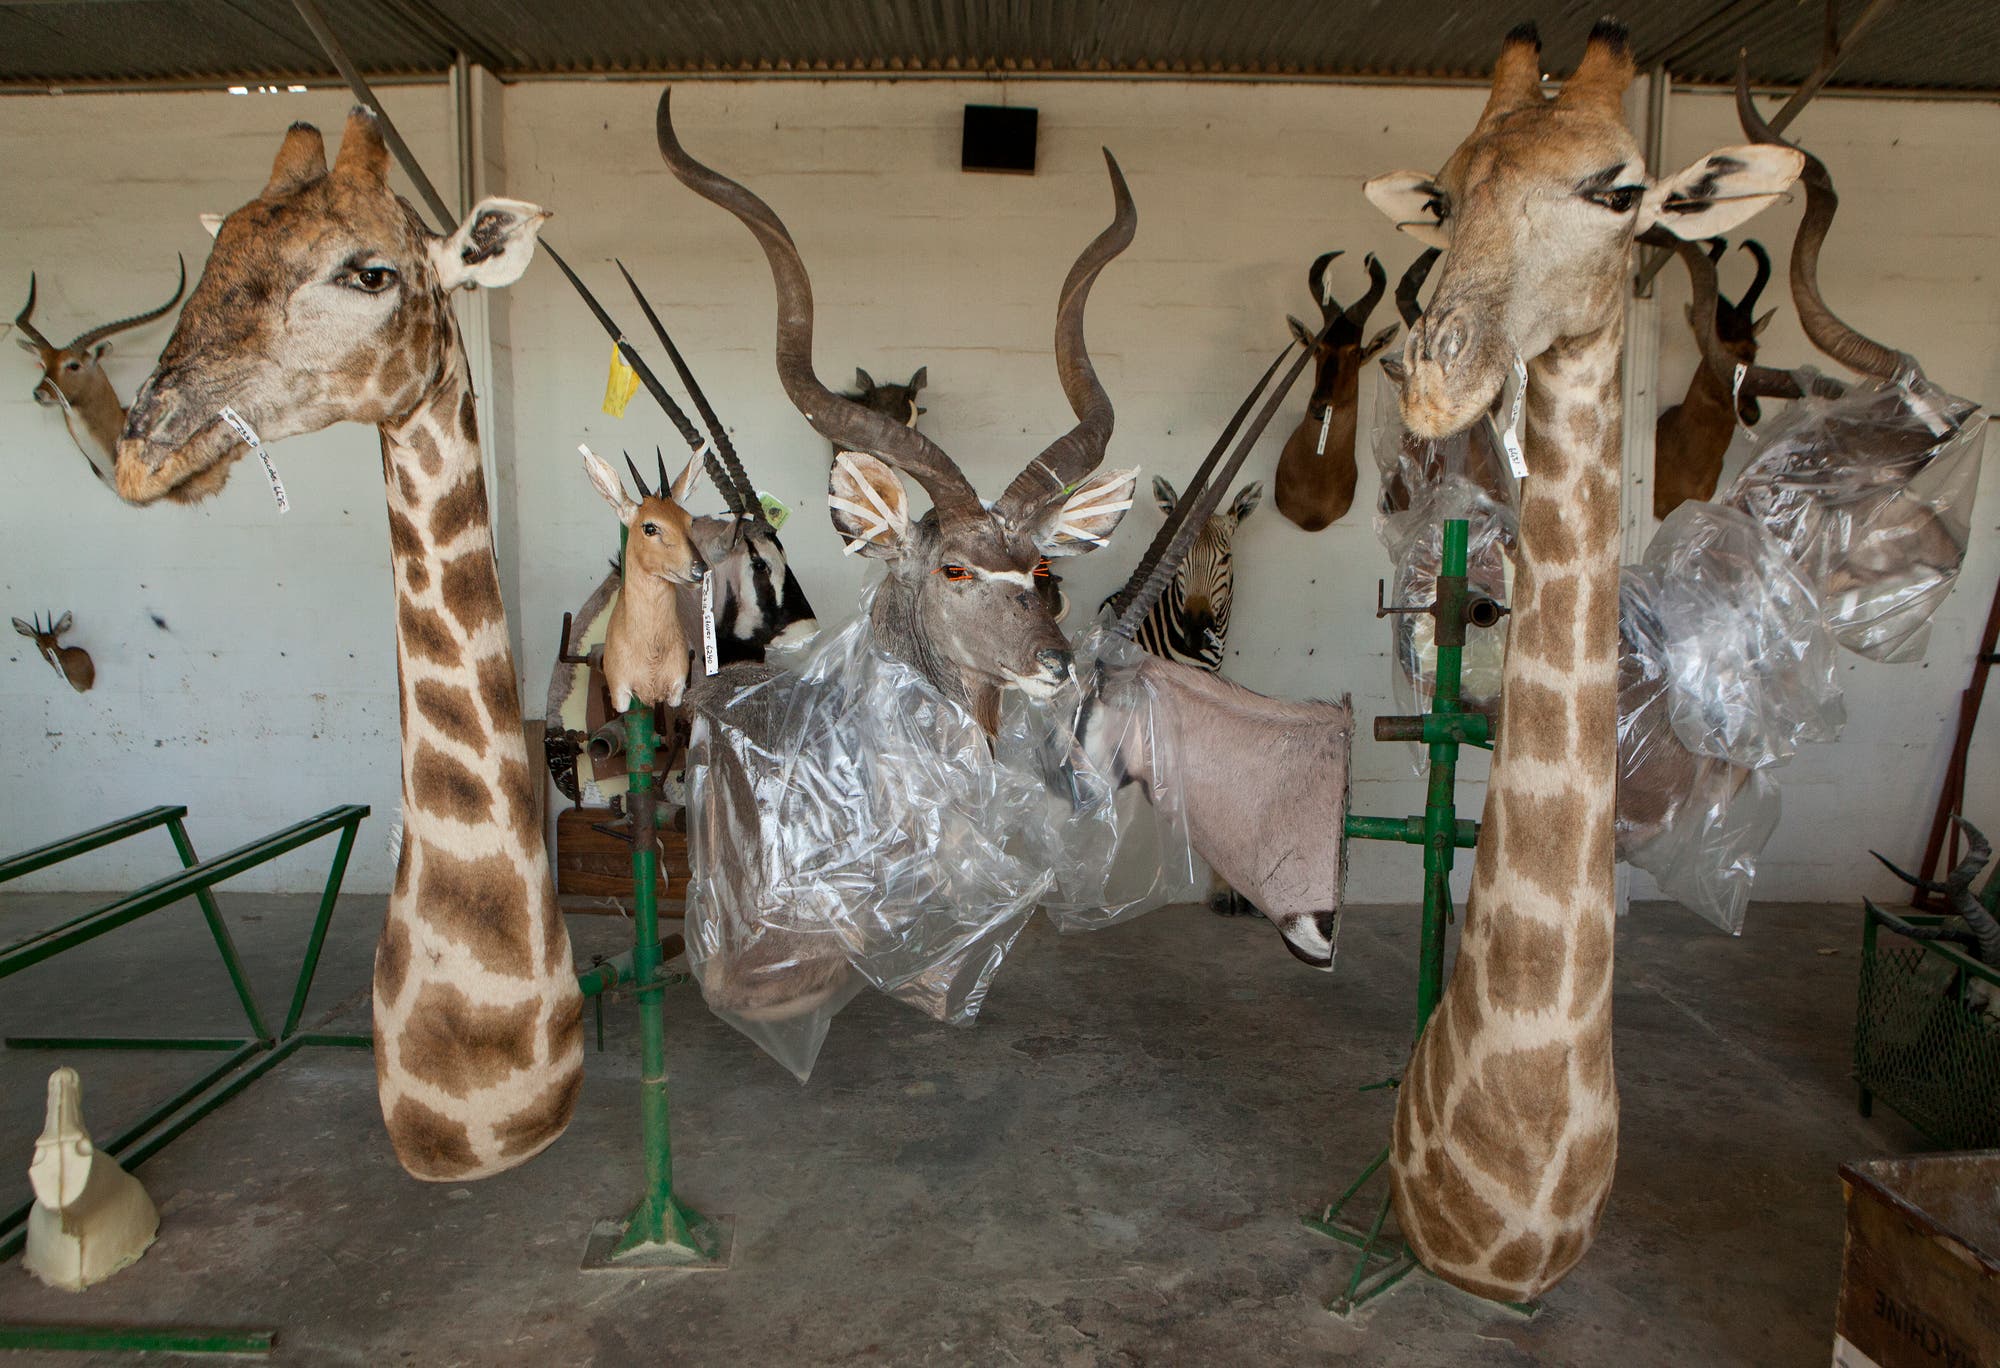 The big game hunters get their memories of the hunting trip delivered to their homes. But the skin and bones of giraffes are also very popular, especially in the USA.